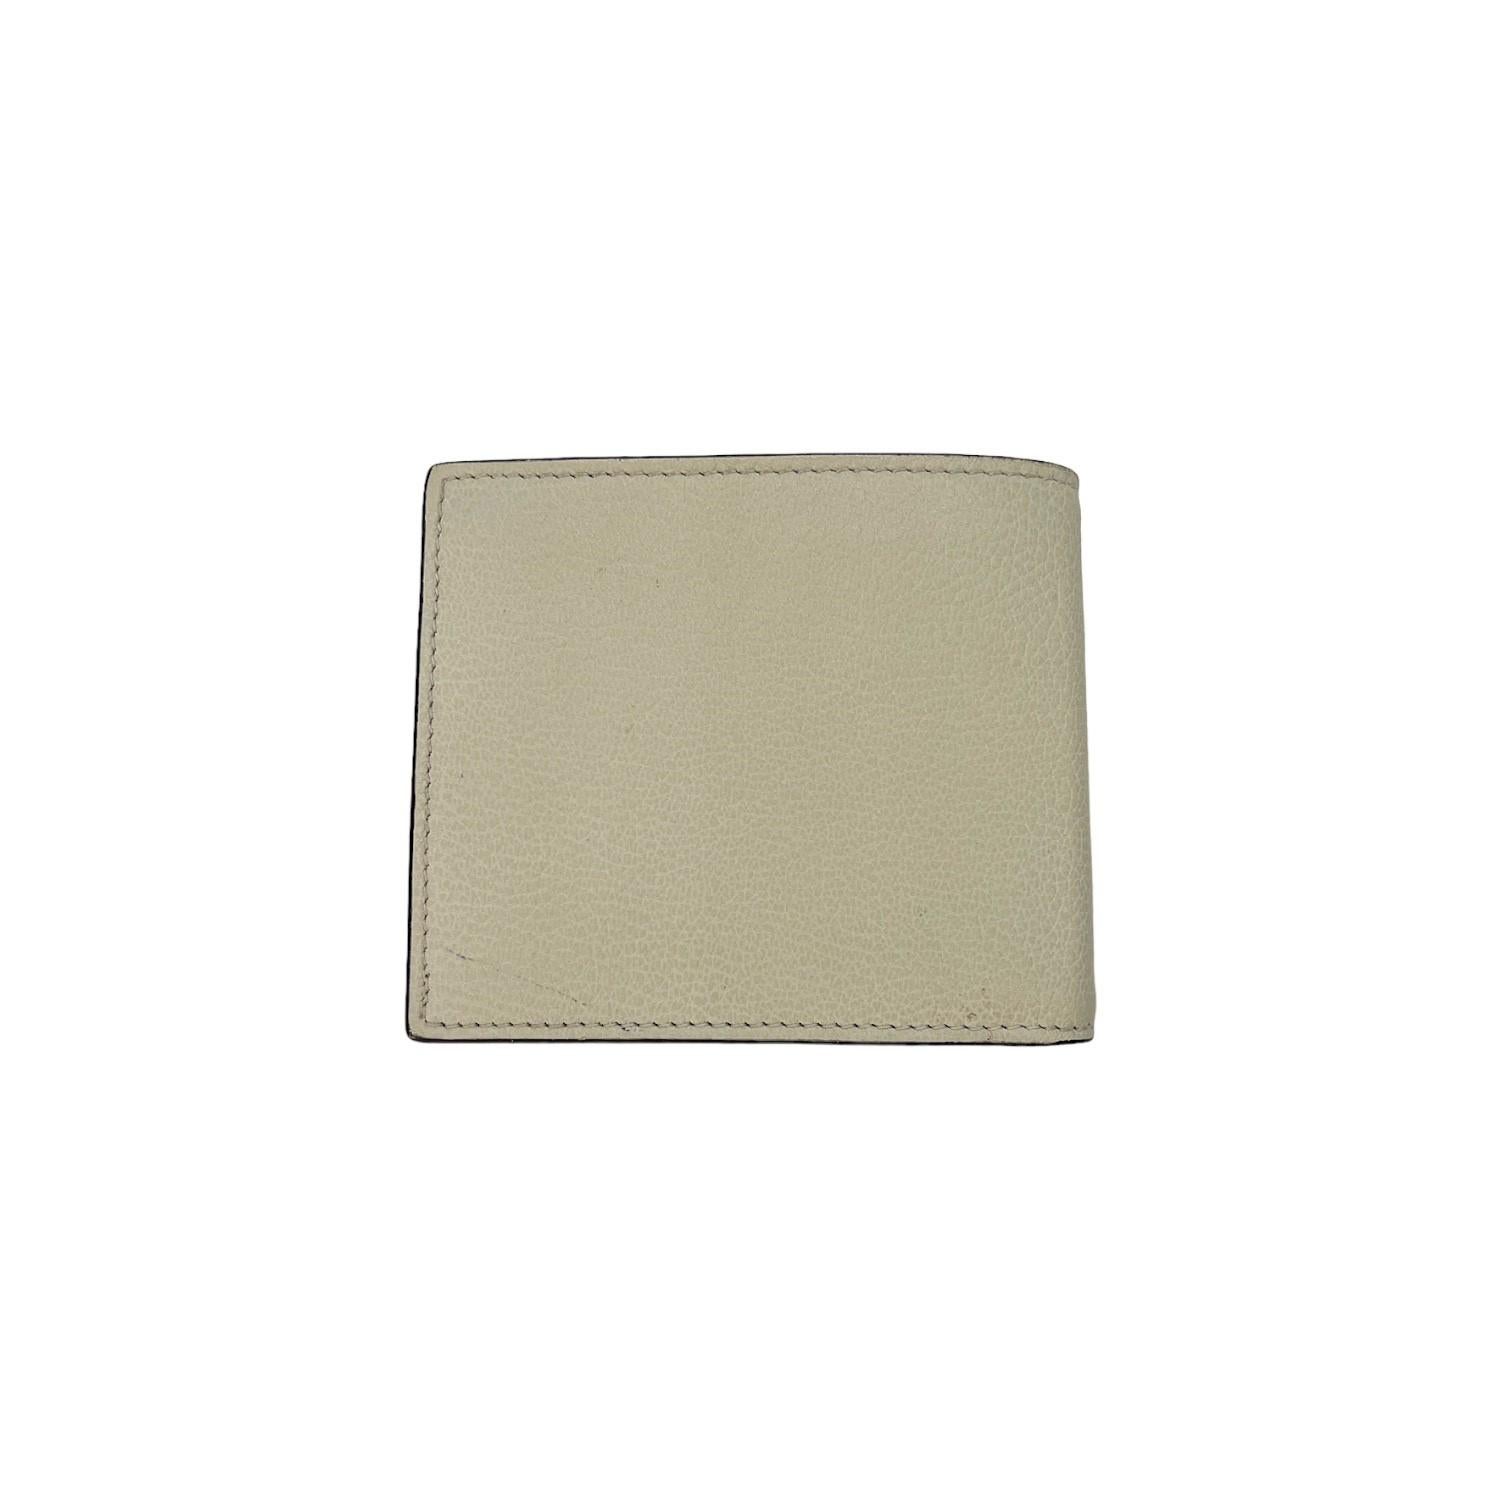 Beige Gucci Leather Graphic Print Bifold Wallet For Sale